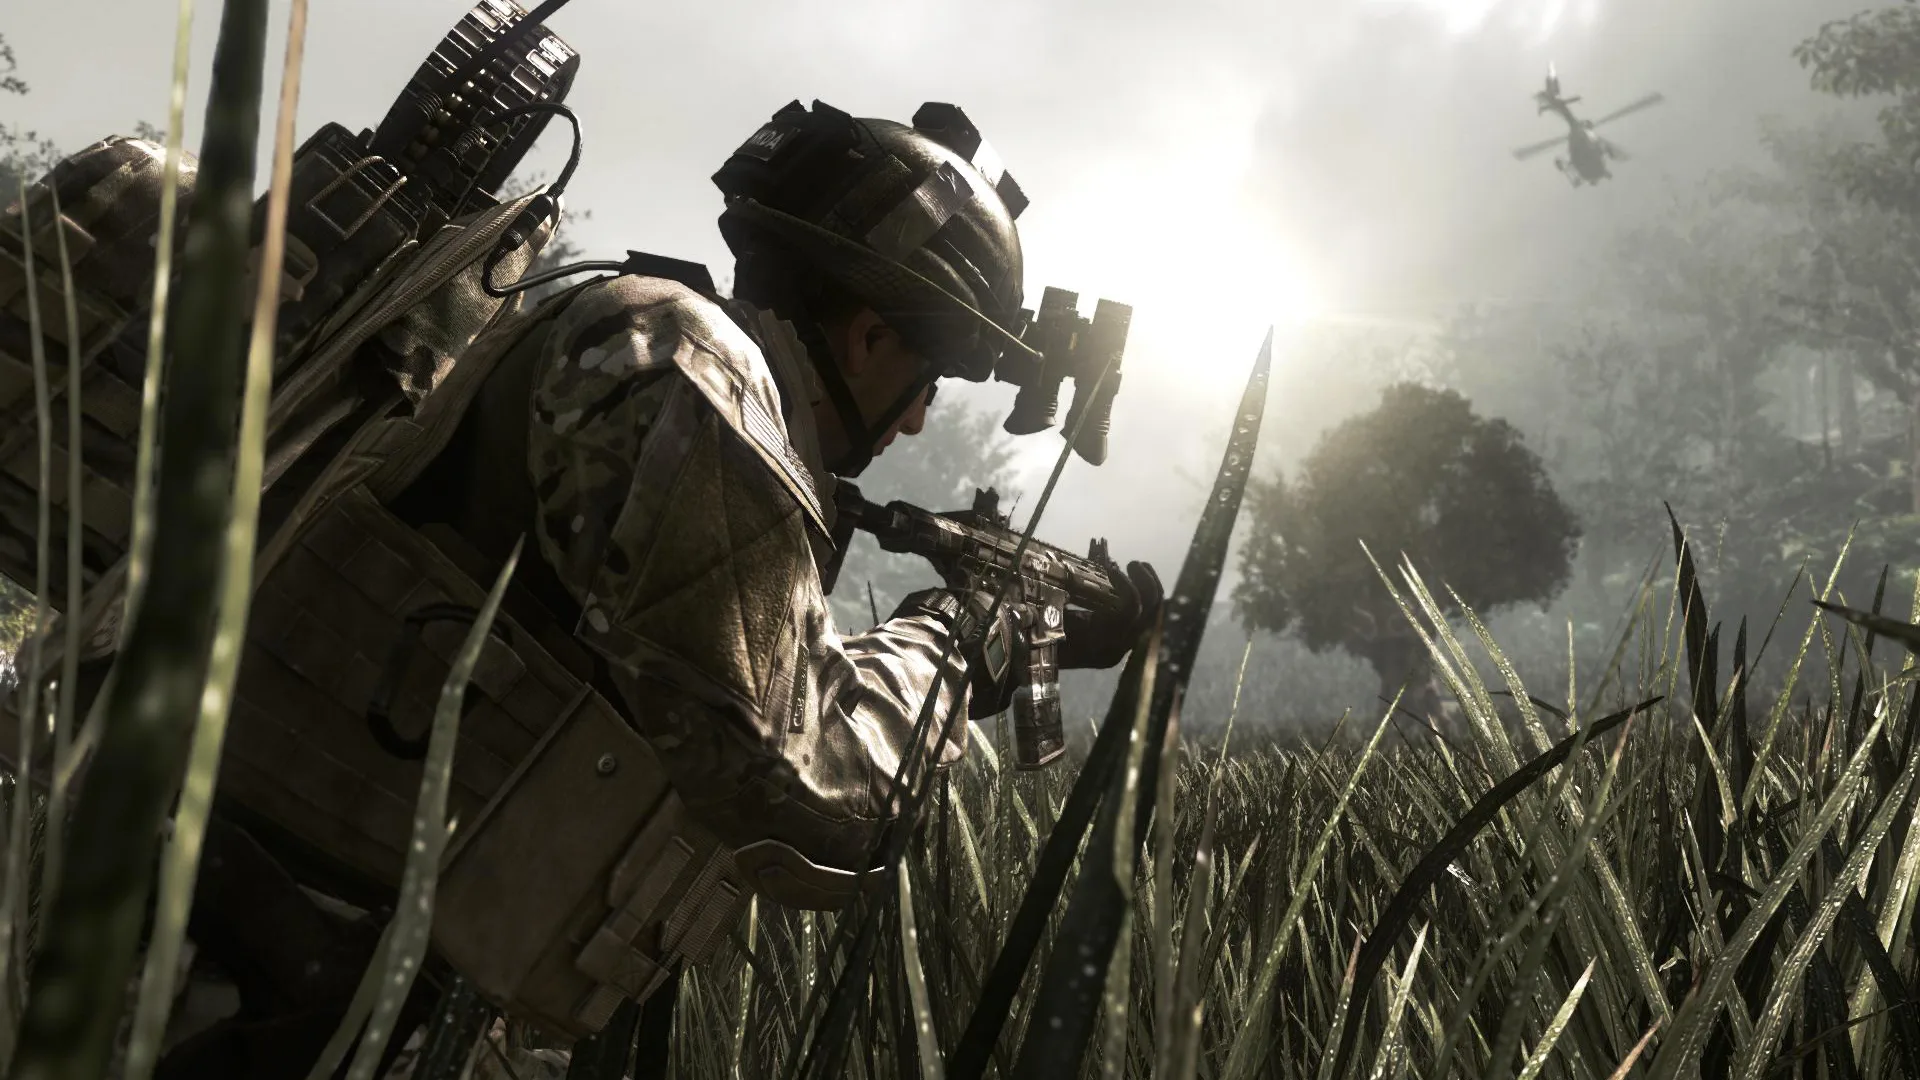 Call of Duty Ghosts Torrent